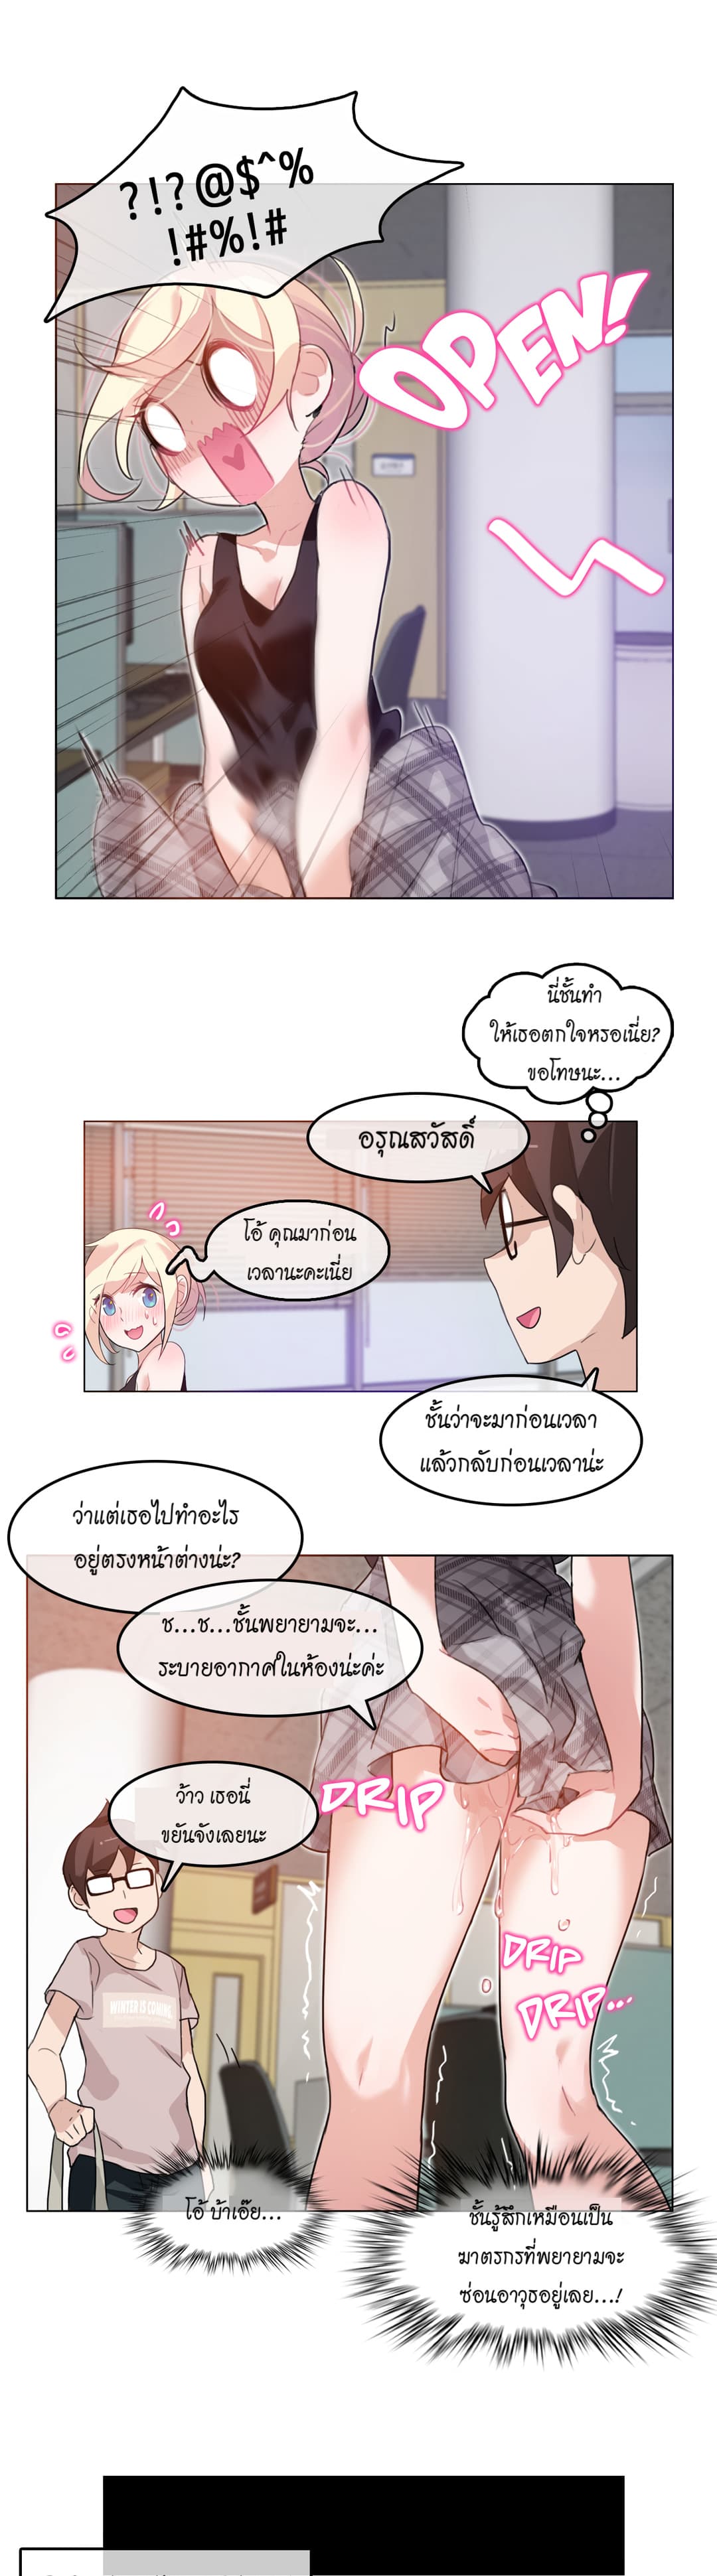 A Pervert’s Daily Life 5 (7)